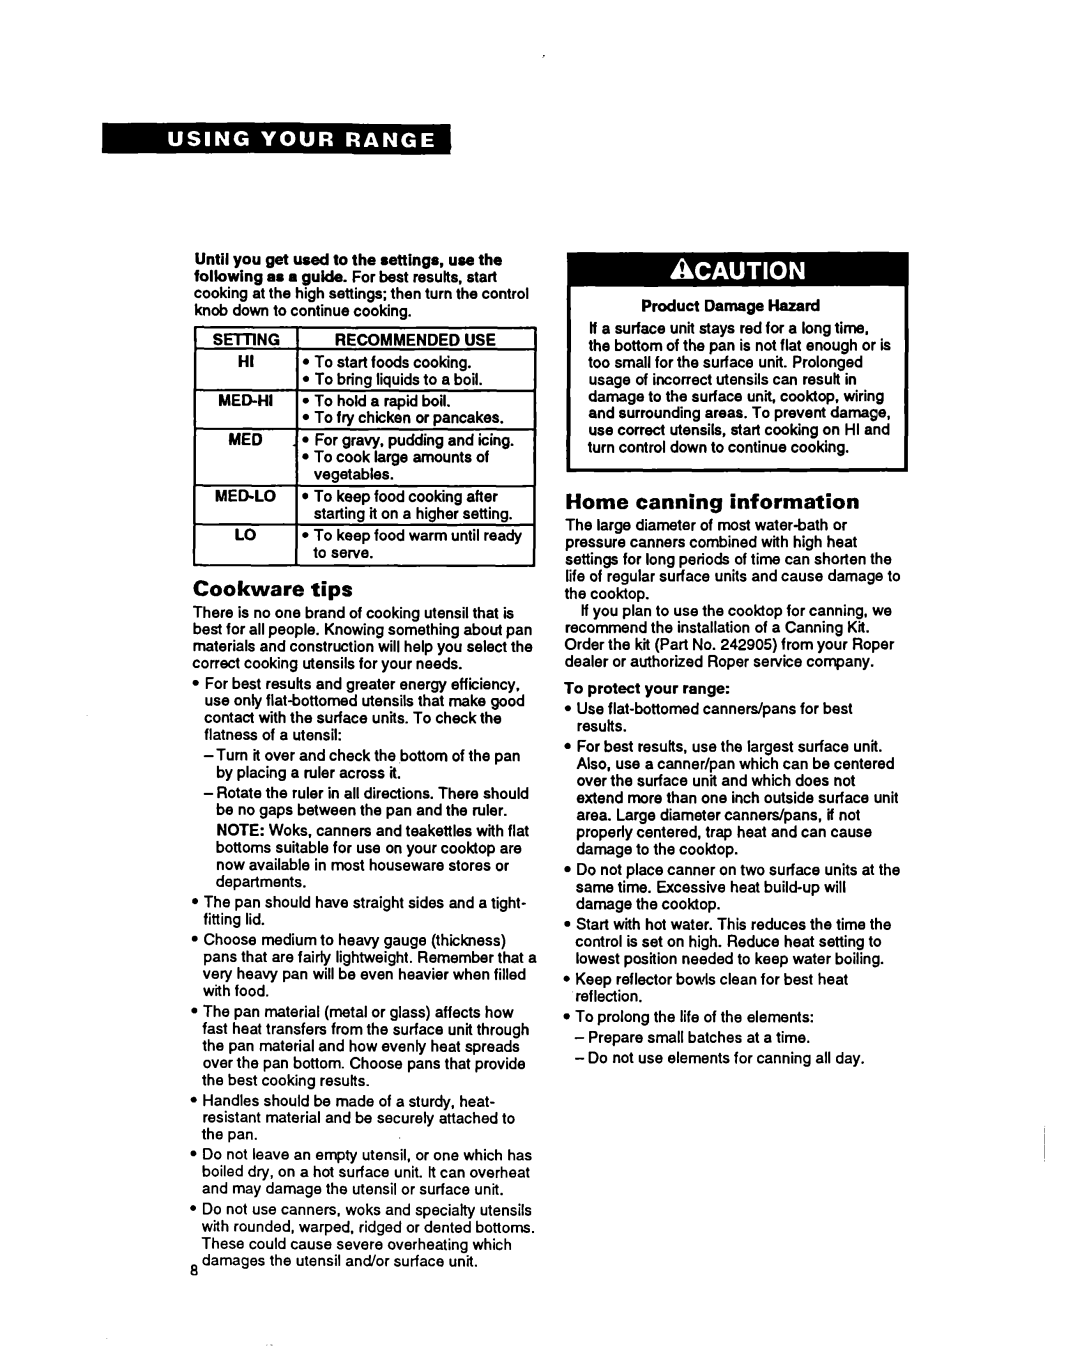 Whirlpool FES340Y important safety instructions Cookware tips, Home canning information 